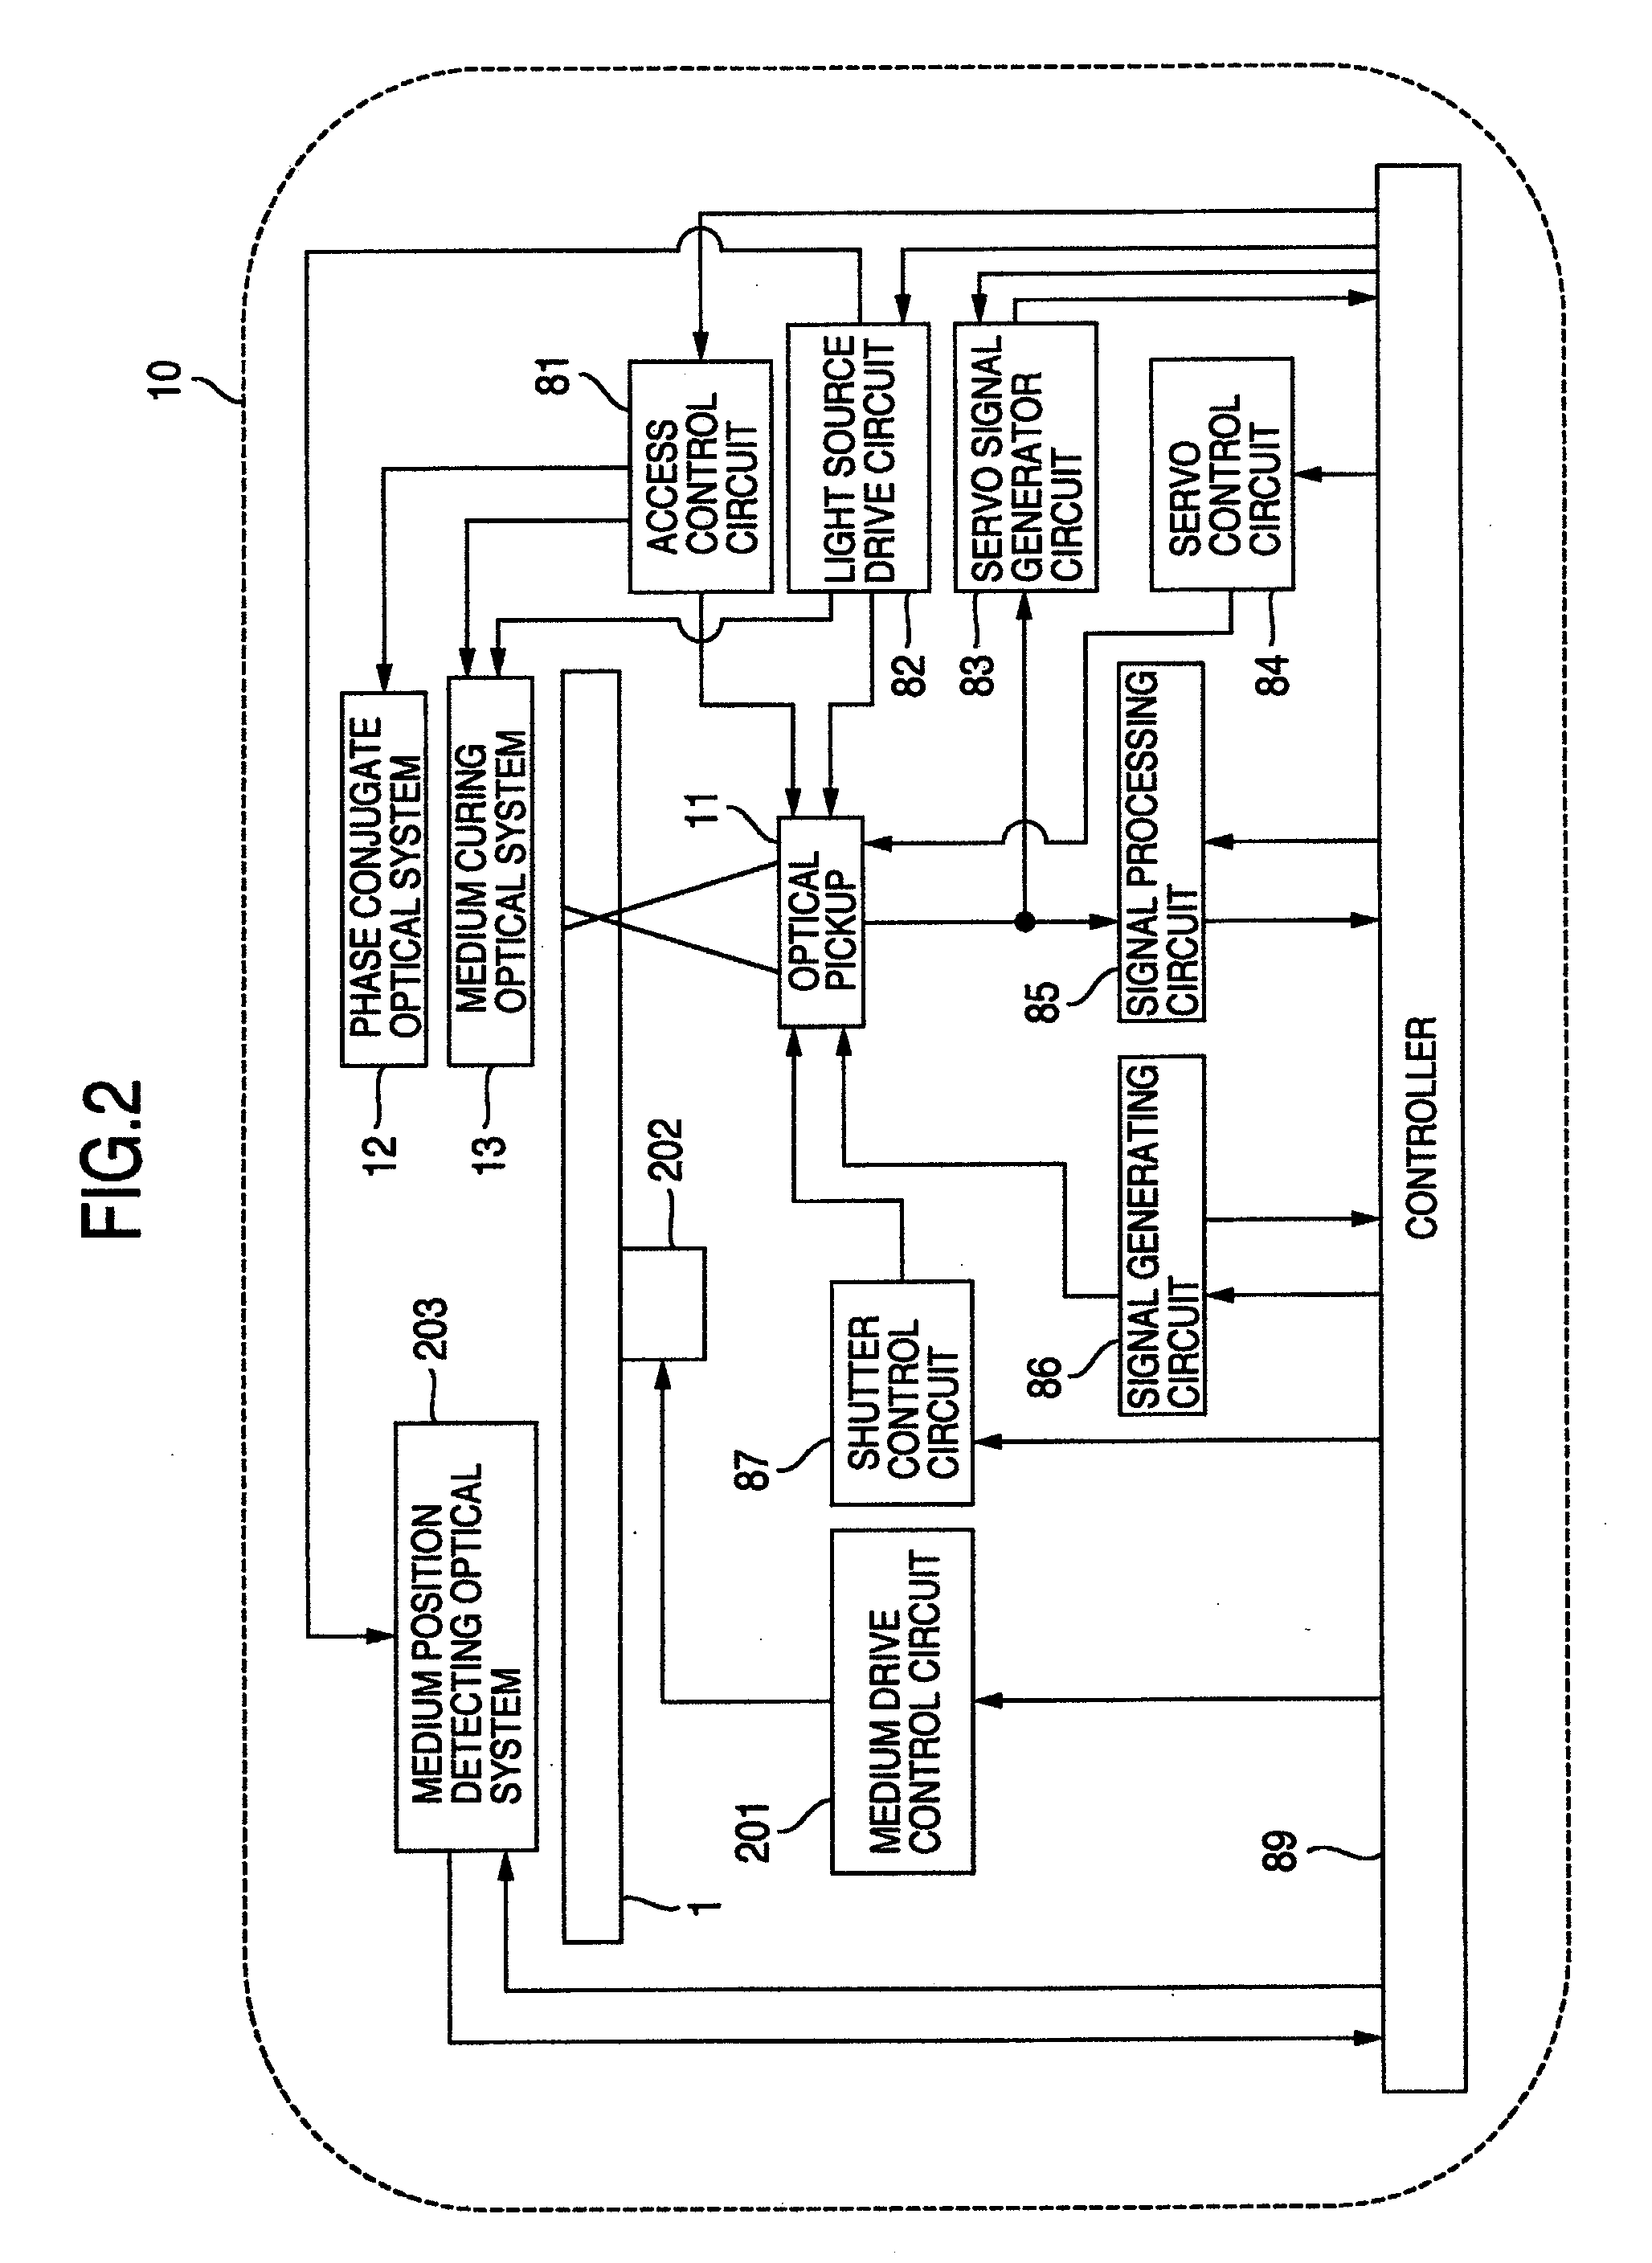 Optical pickup, optical information recording and reproducing apparatus and method for optically recording and reproducing information